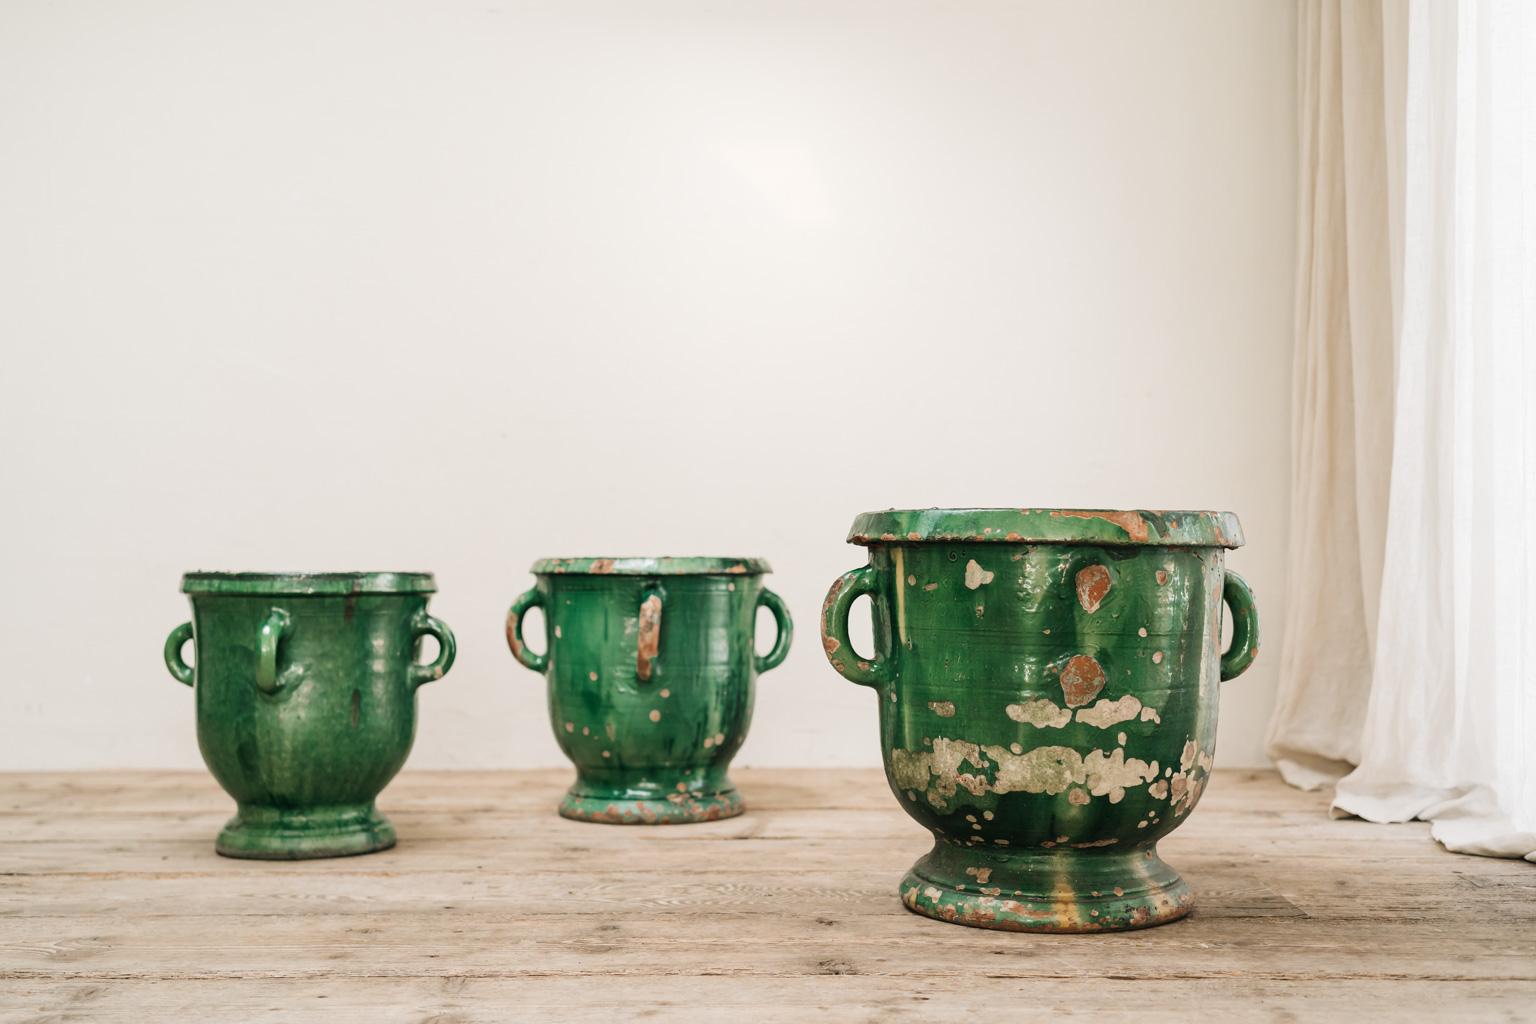 Early 20th century set of 3 glazed terra cotta jardinières/planters from Castelnaudary in France, dimensions 54 cm high x 61 cm diameter, 47 cm high x 55 cm diameter and 45 cm high x 50 cm diameter. Can be used indoors as well as outdoors .
 